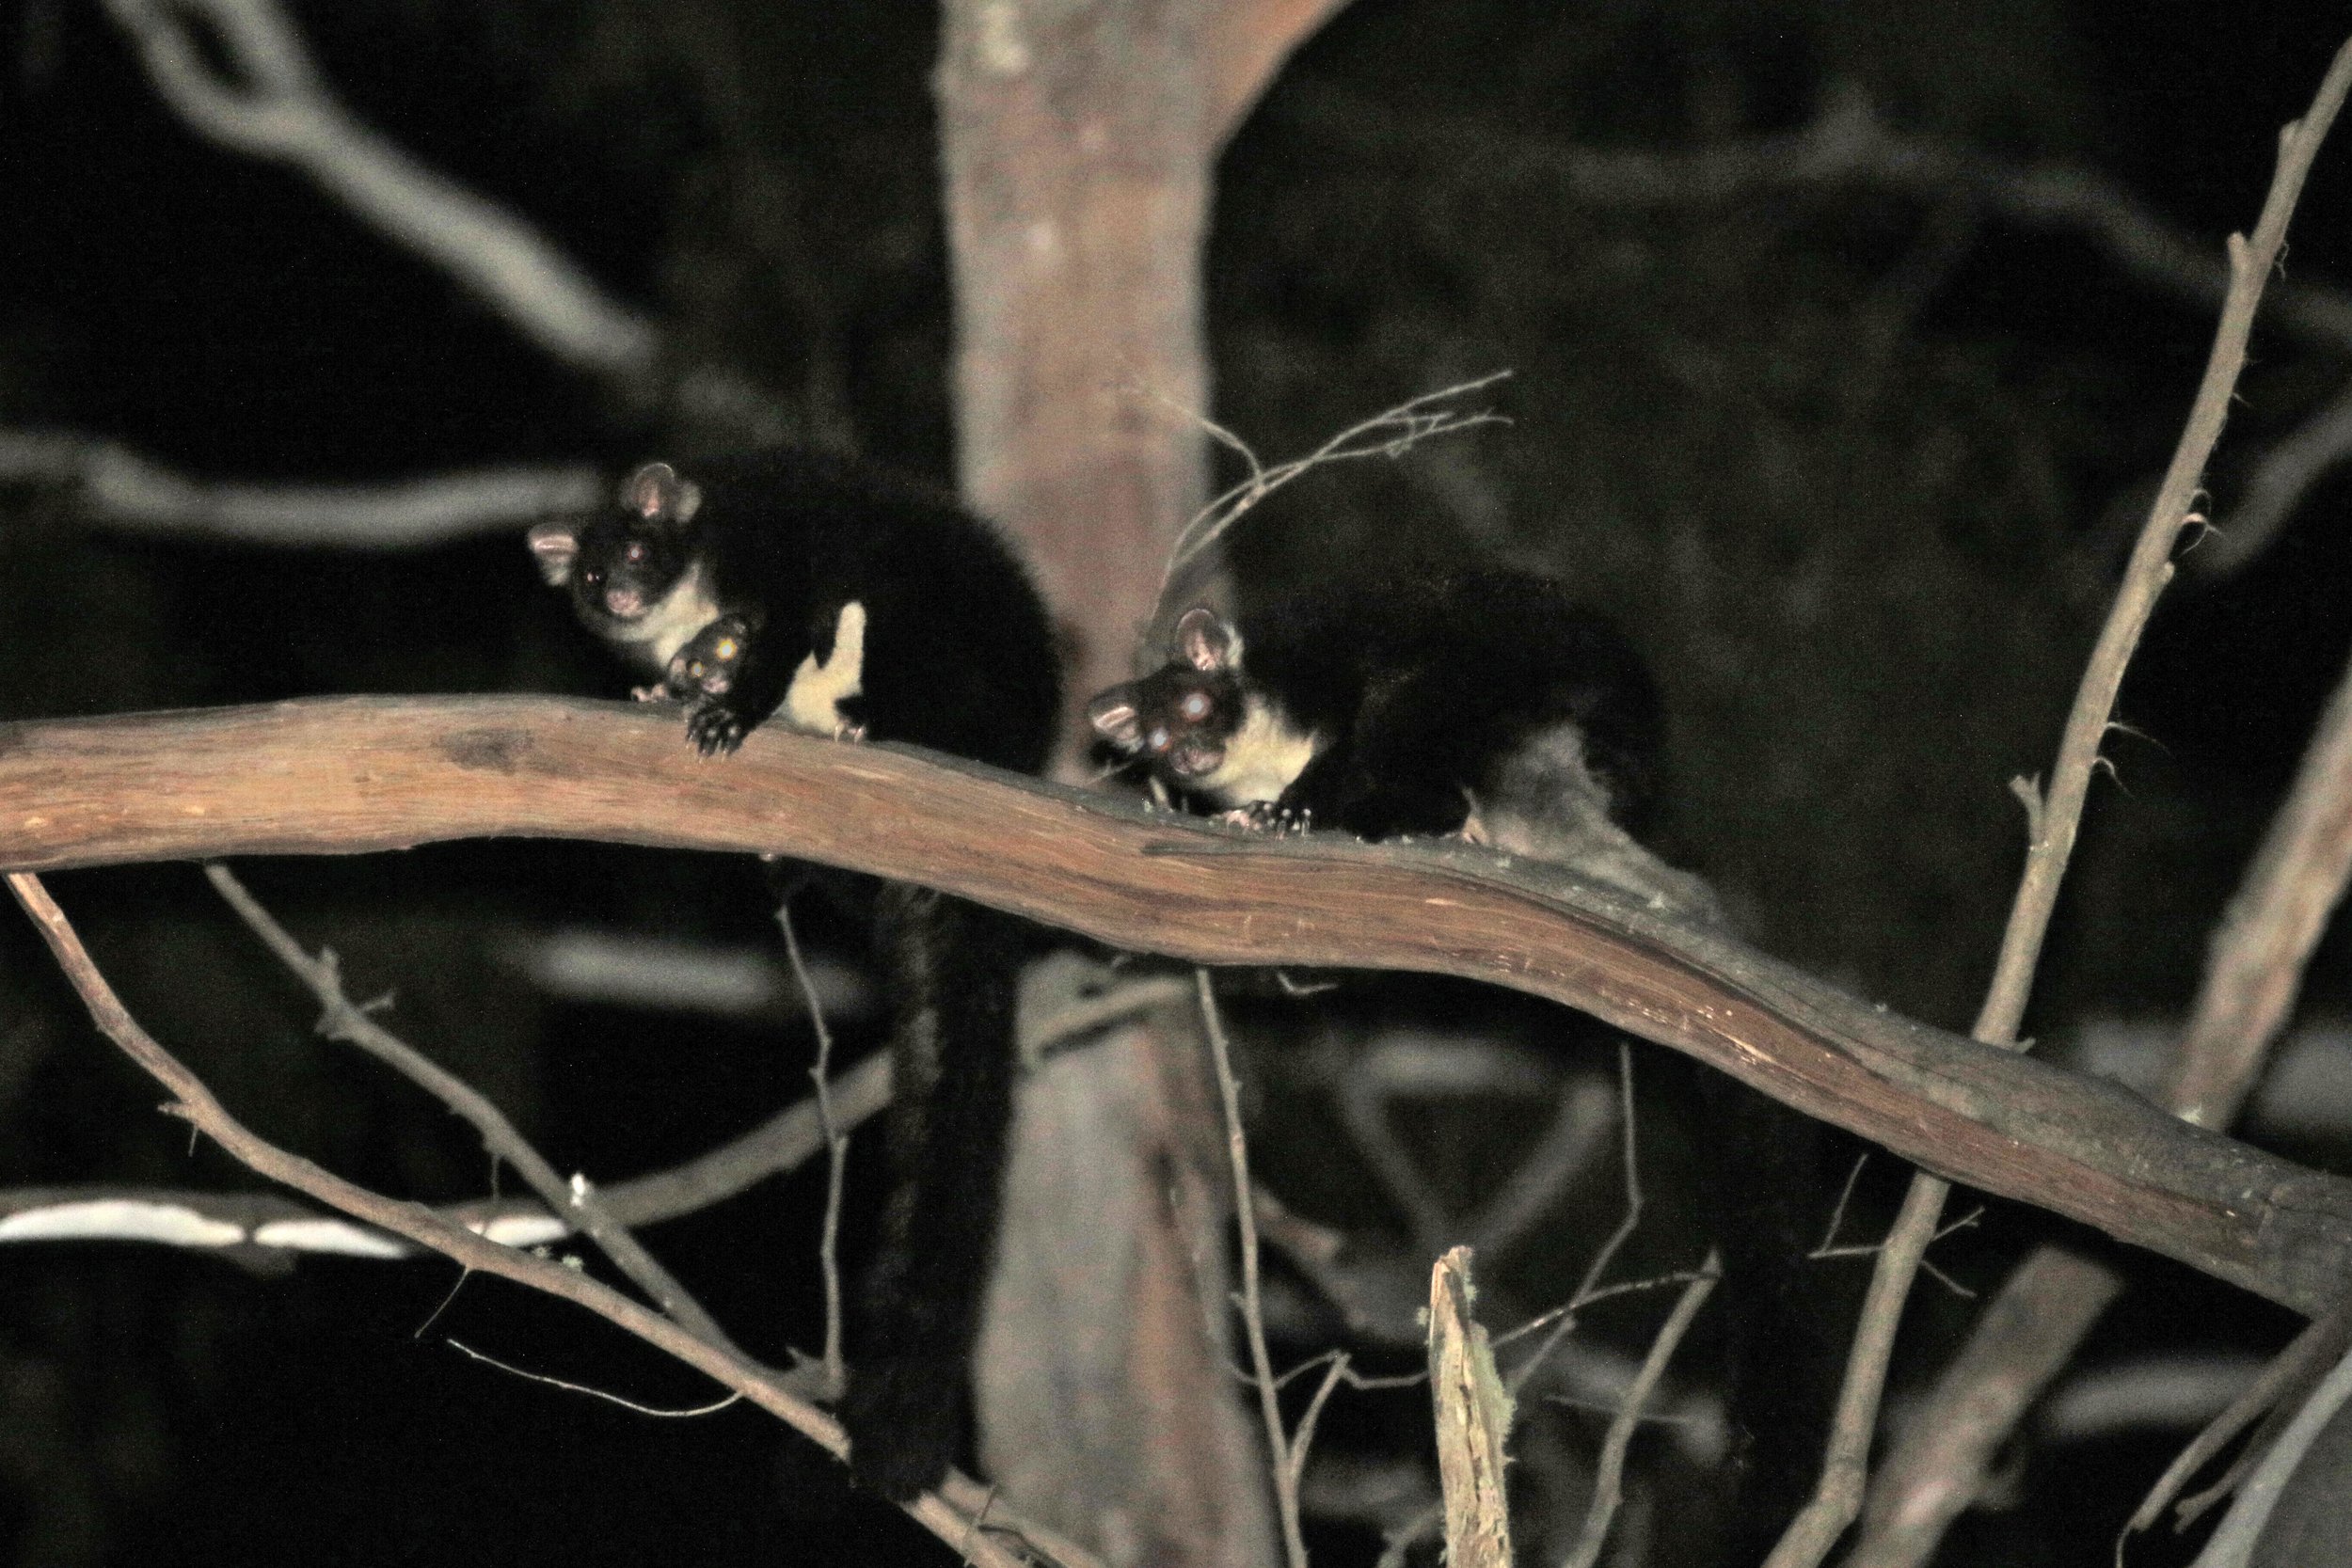  Greater Gliders in the Wombat taken by one our local hero’s  